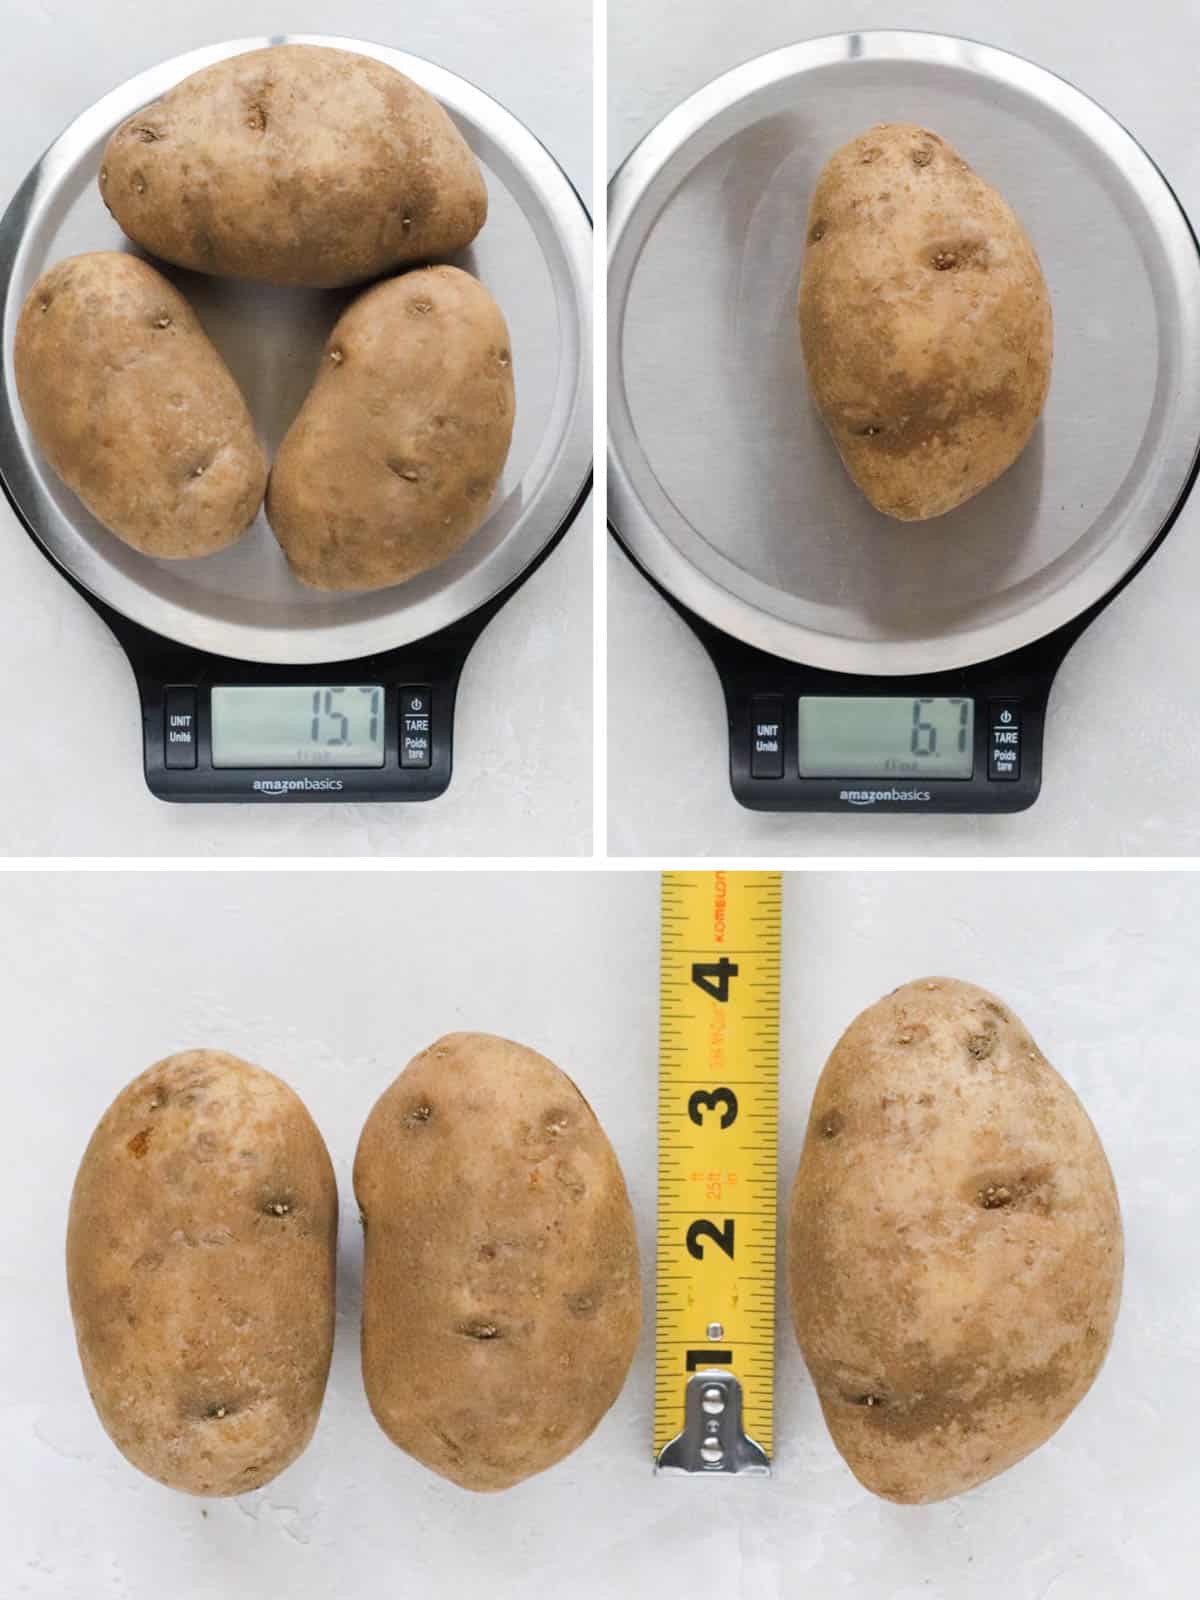 3 photo collage with three russet potatoes on a scale that reads 15.7 ounces, one potato on a scale that reads 6.7 ounces, and the three potatoes next to a measuring tape